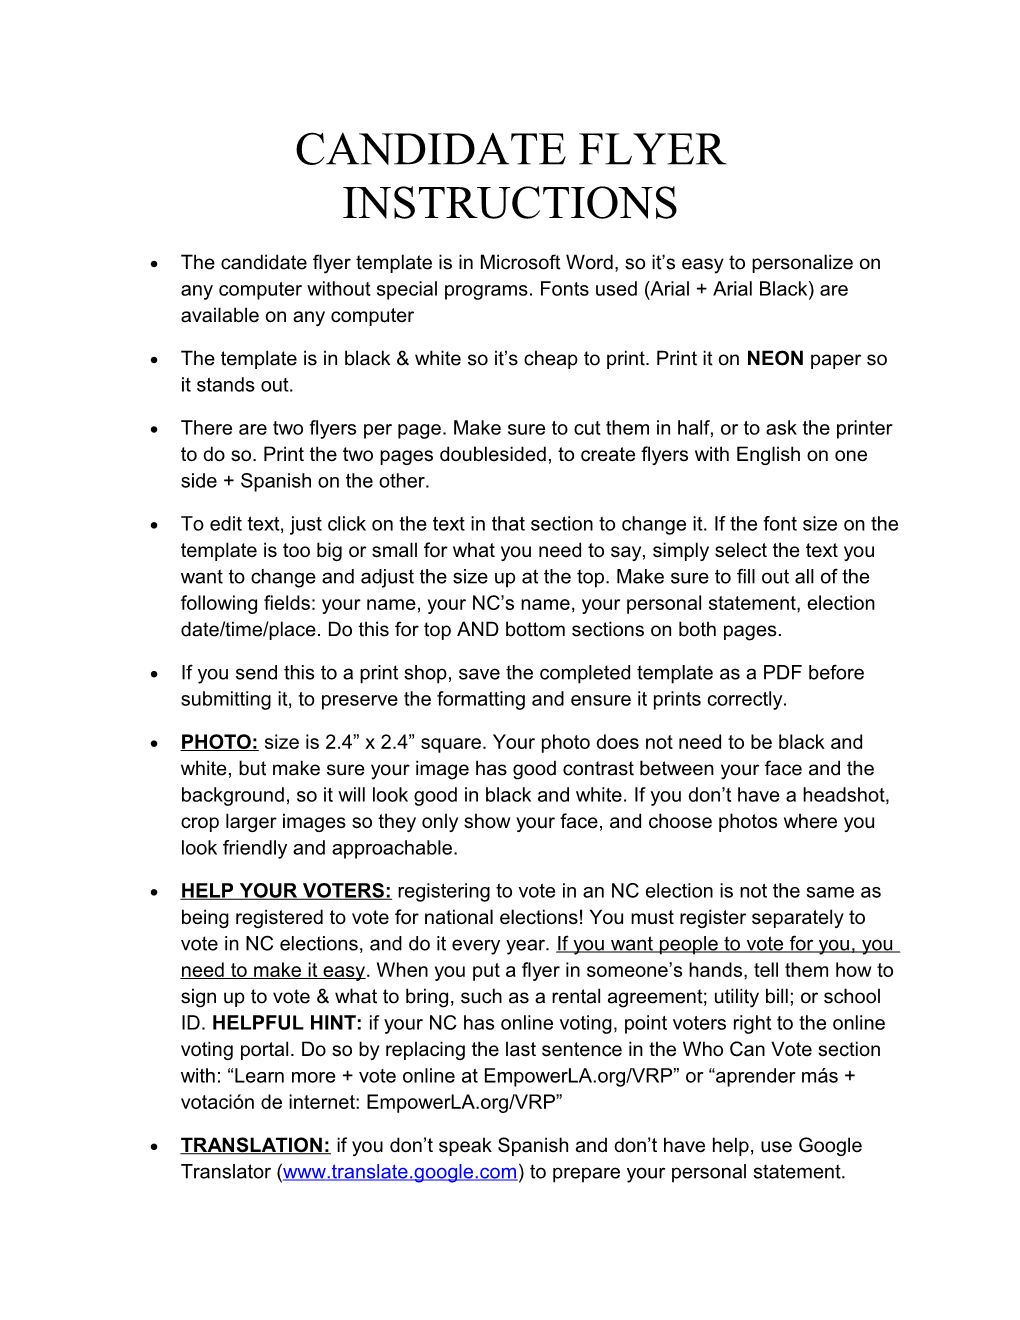 Candidate Flyer Instructions